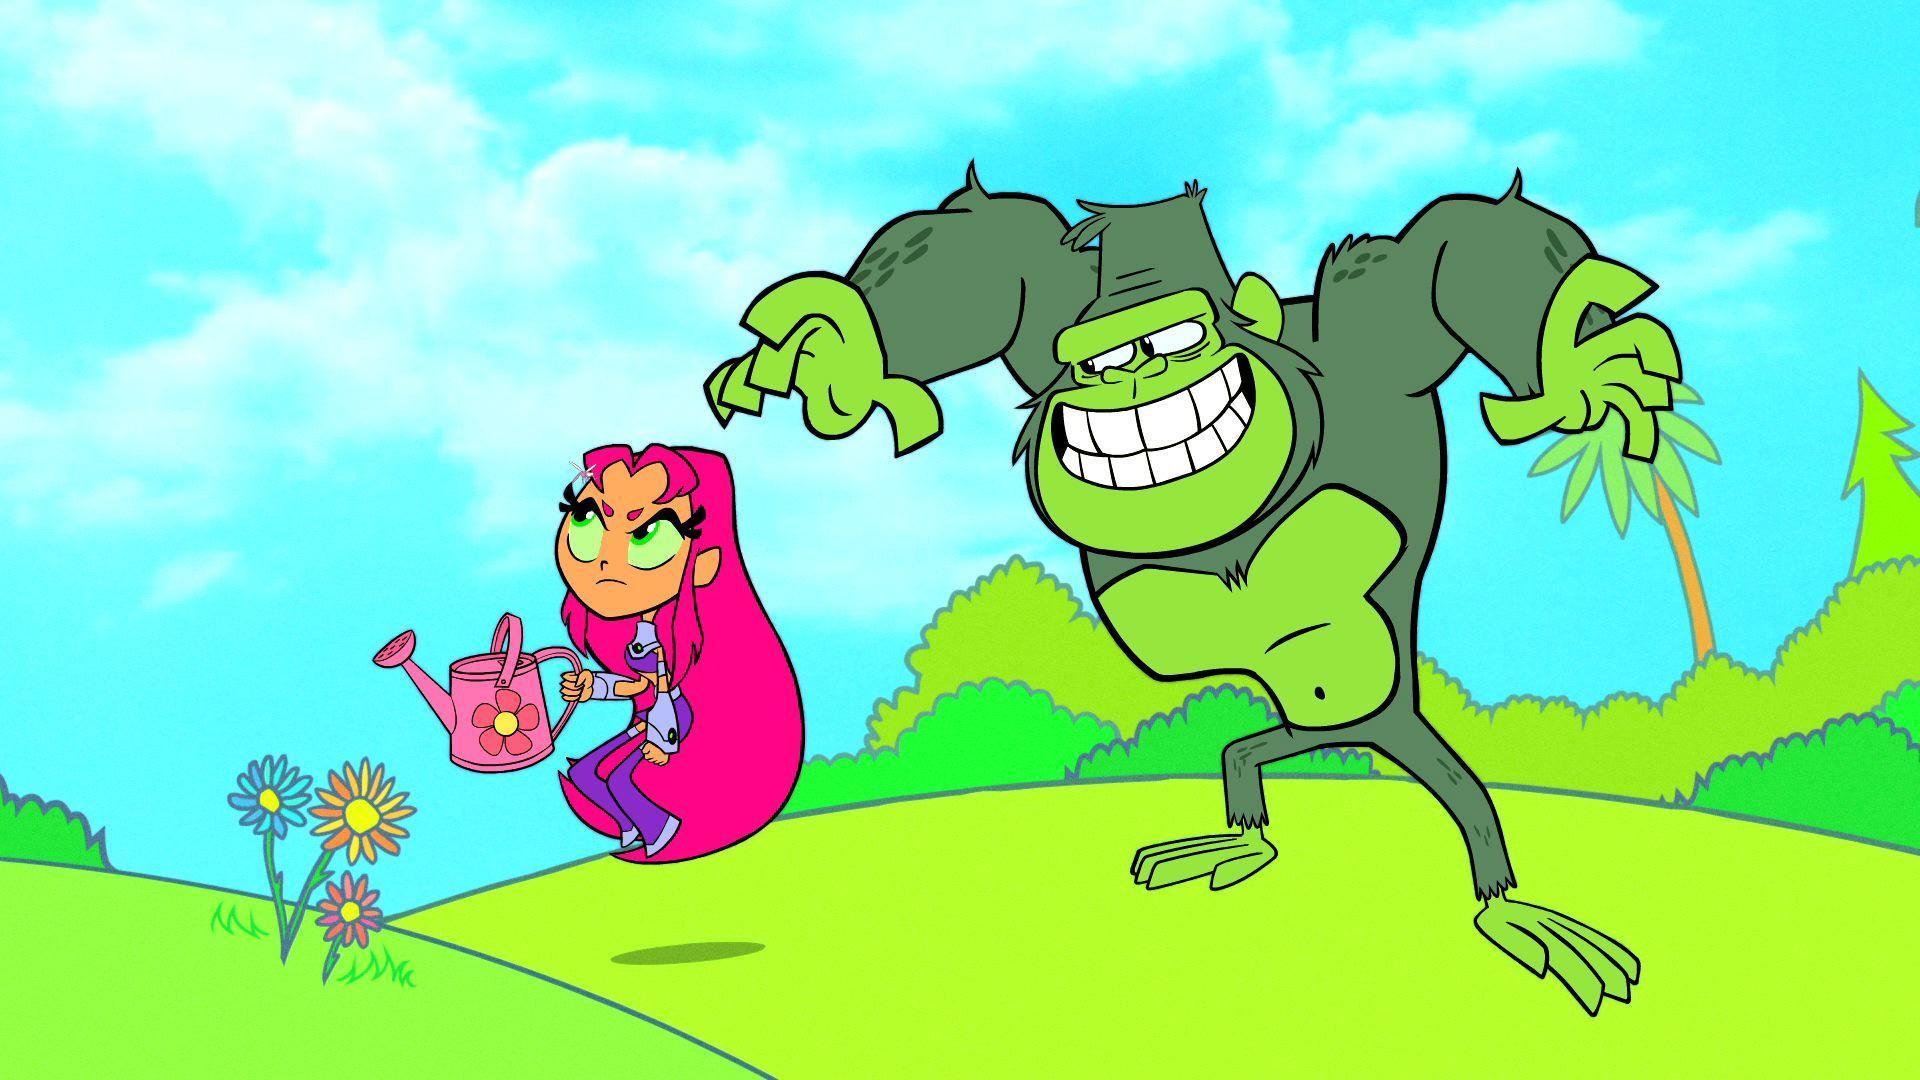 Teen Titans Go! Episode 5 'Ghost Boy' Clip and Image